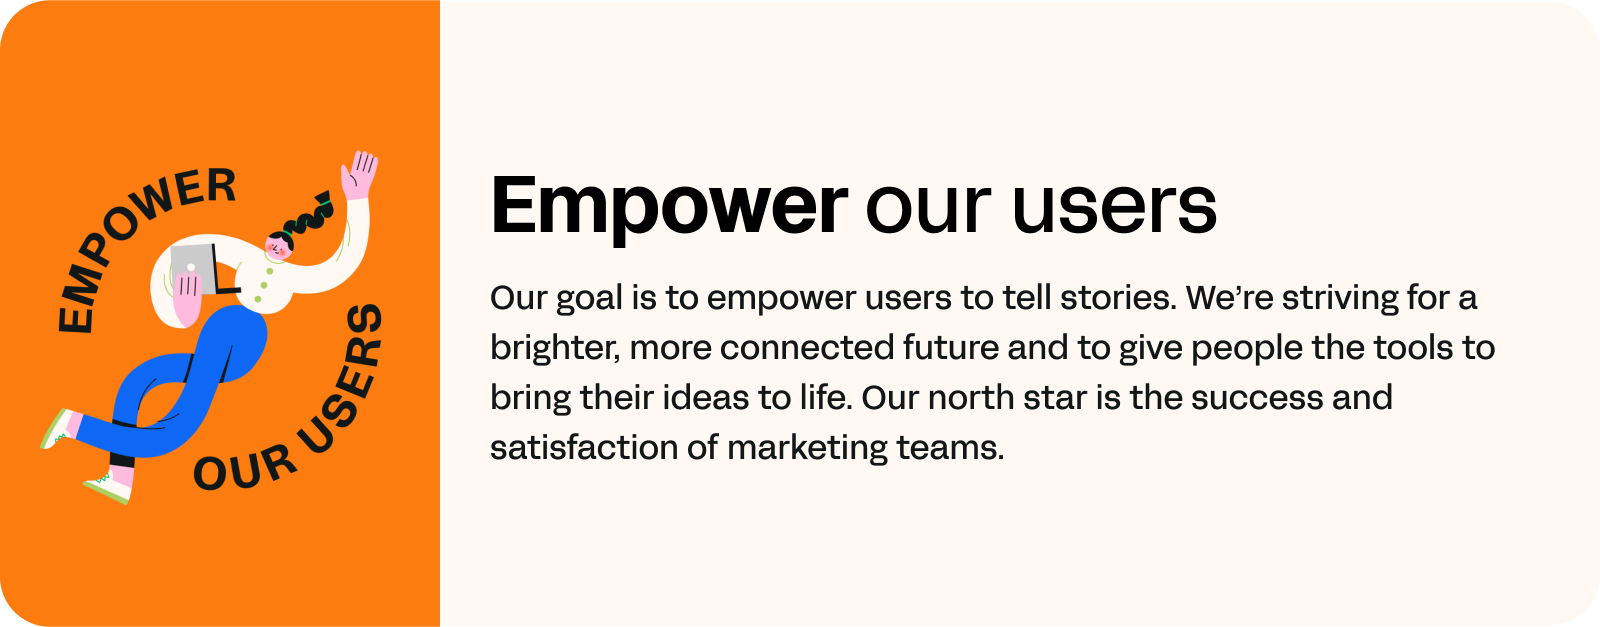 Linearity company values: empower users